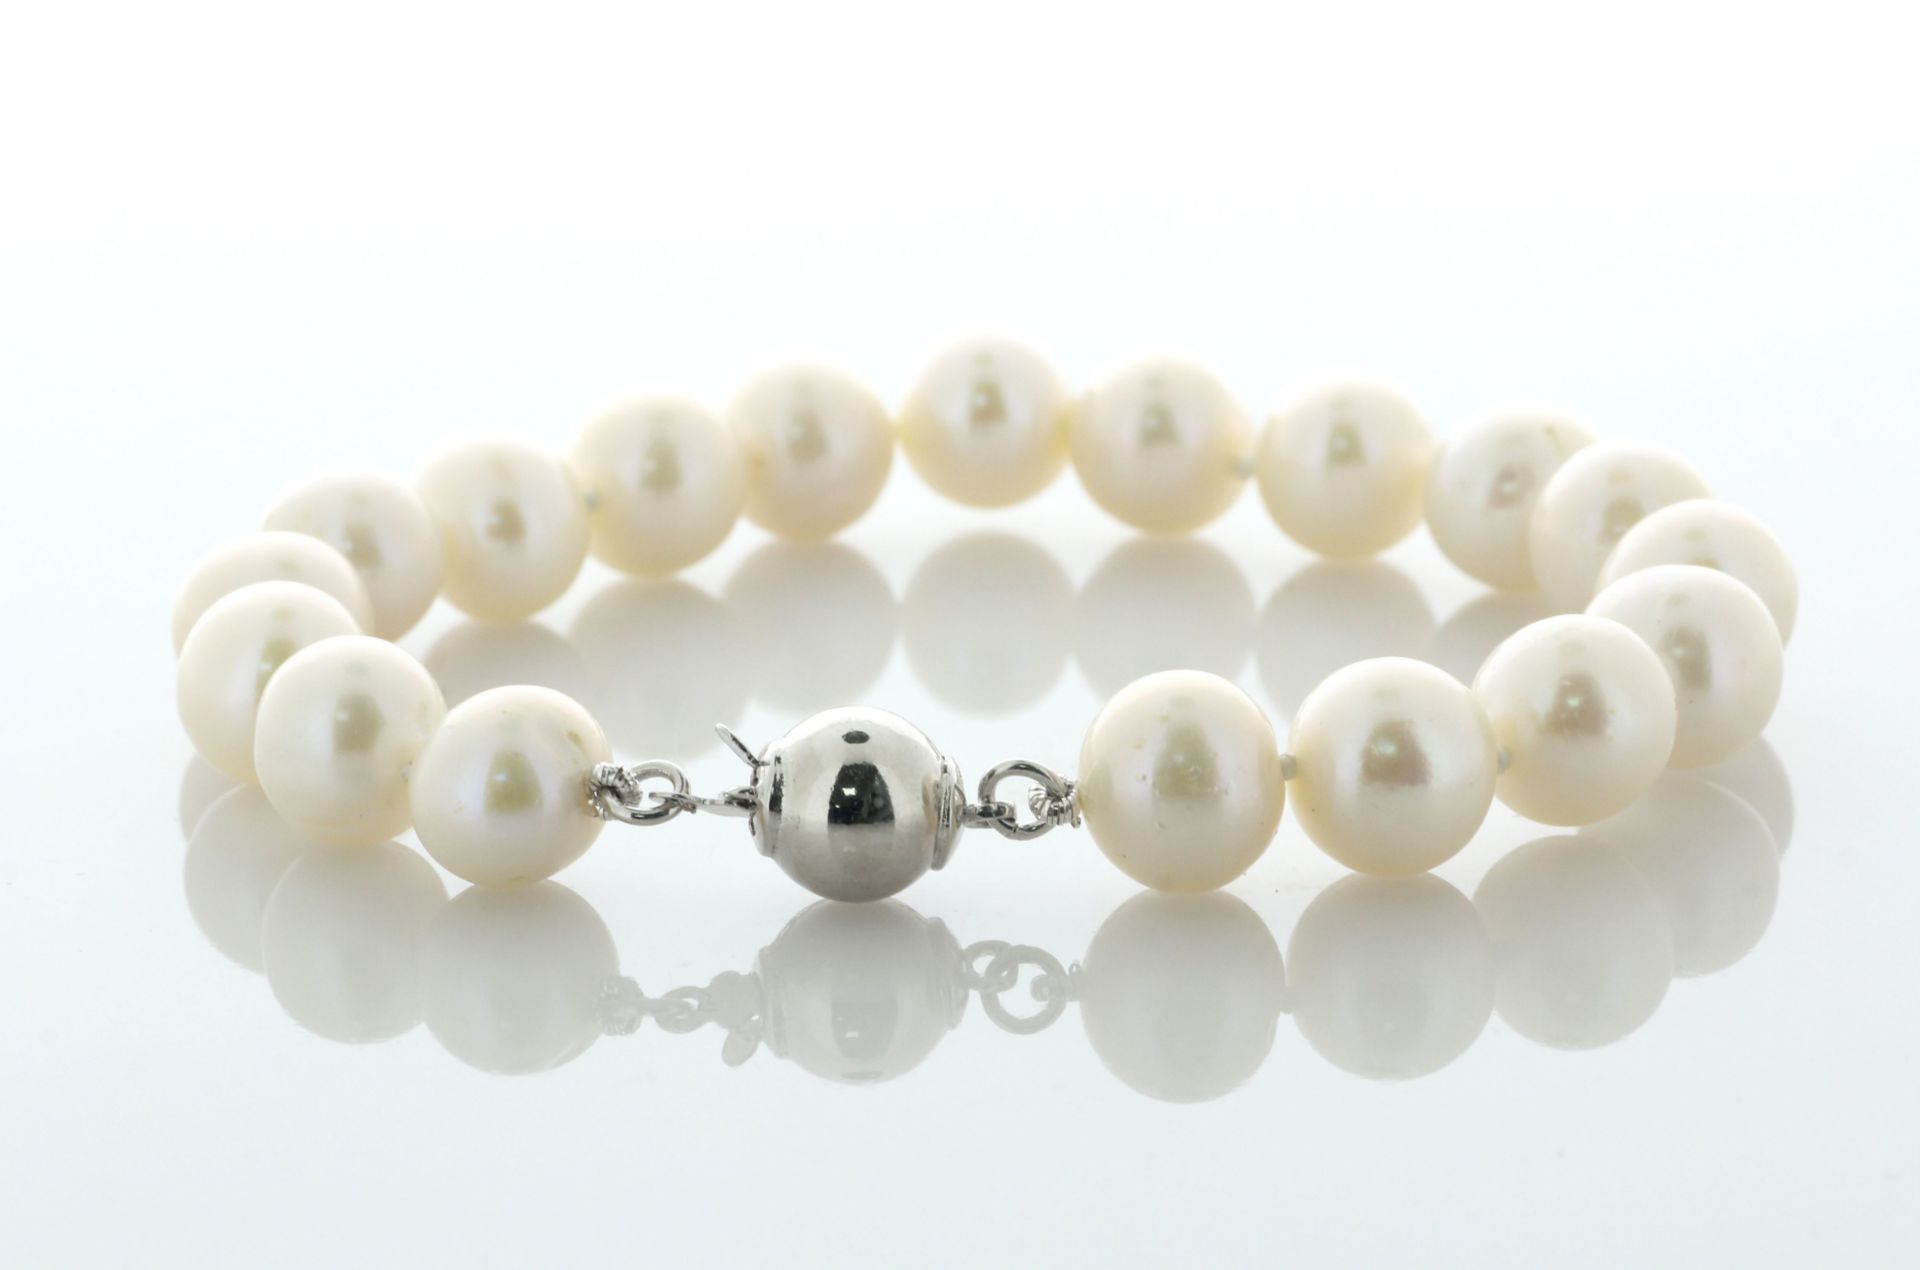 6.5 Inches Freshwater Cultured 8.5 - 9.0mm Pearl Bracelet With Silver Clasp - Valued By AGI £285. - Image 2 of 4